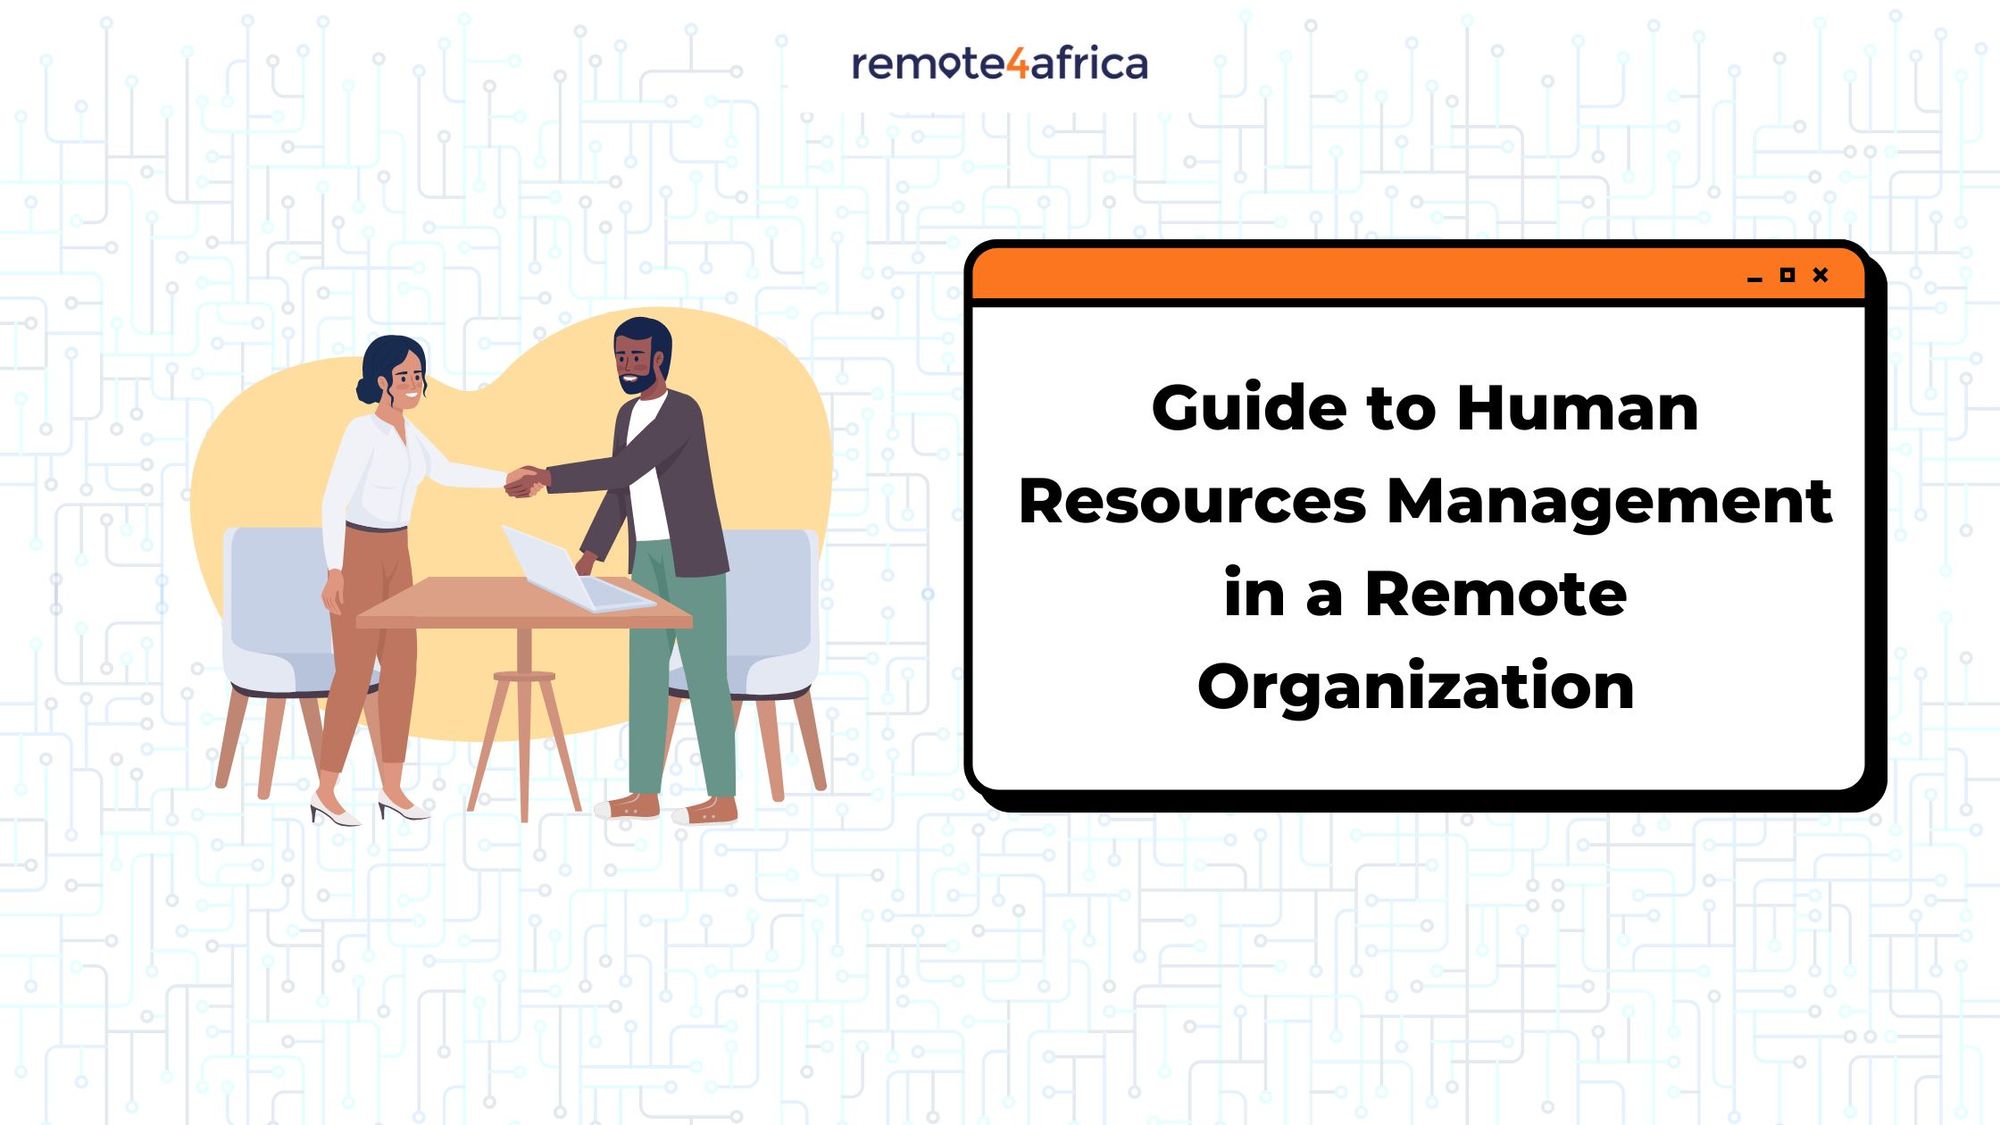 Guide to Human Resources Management in a Remote Organization